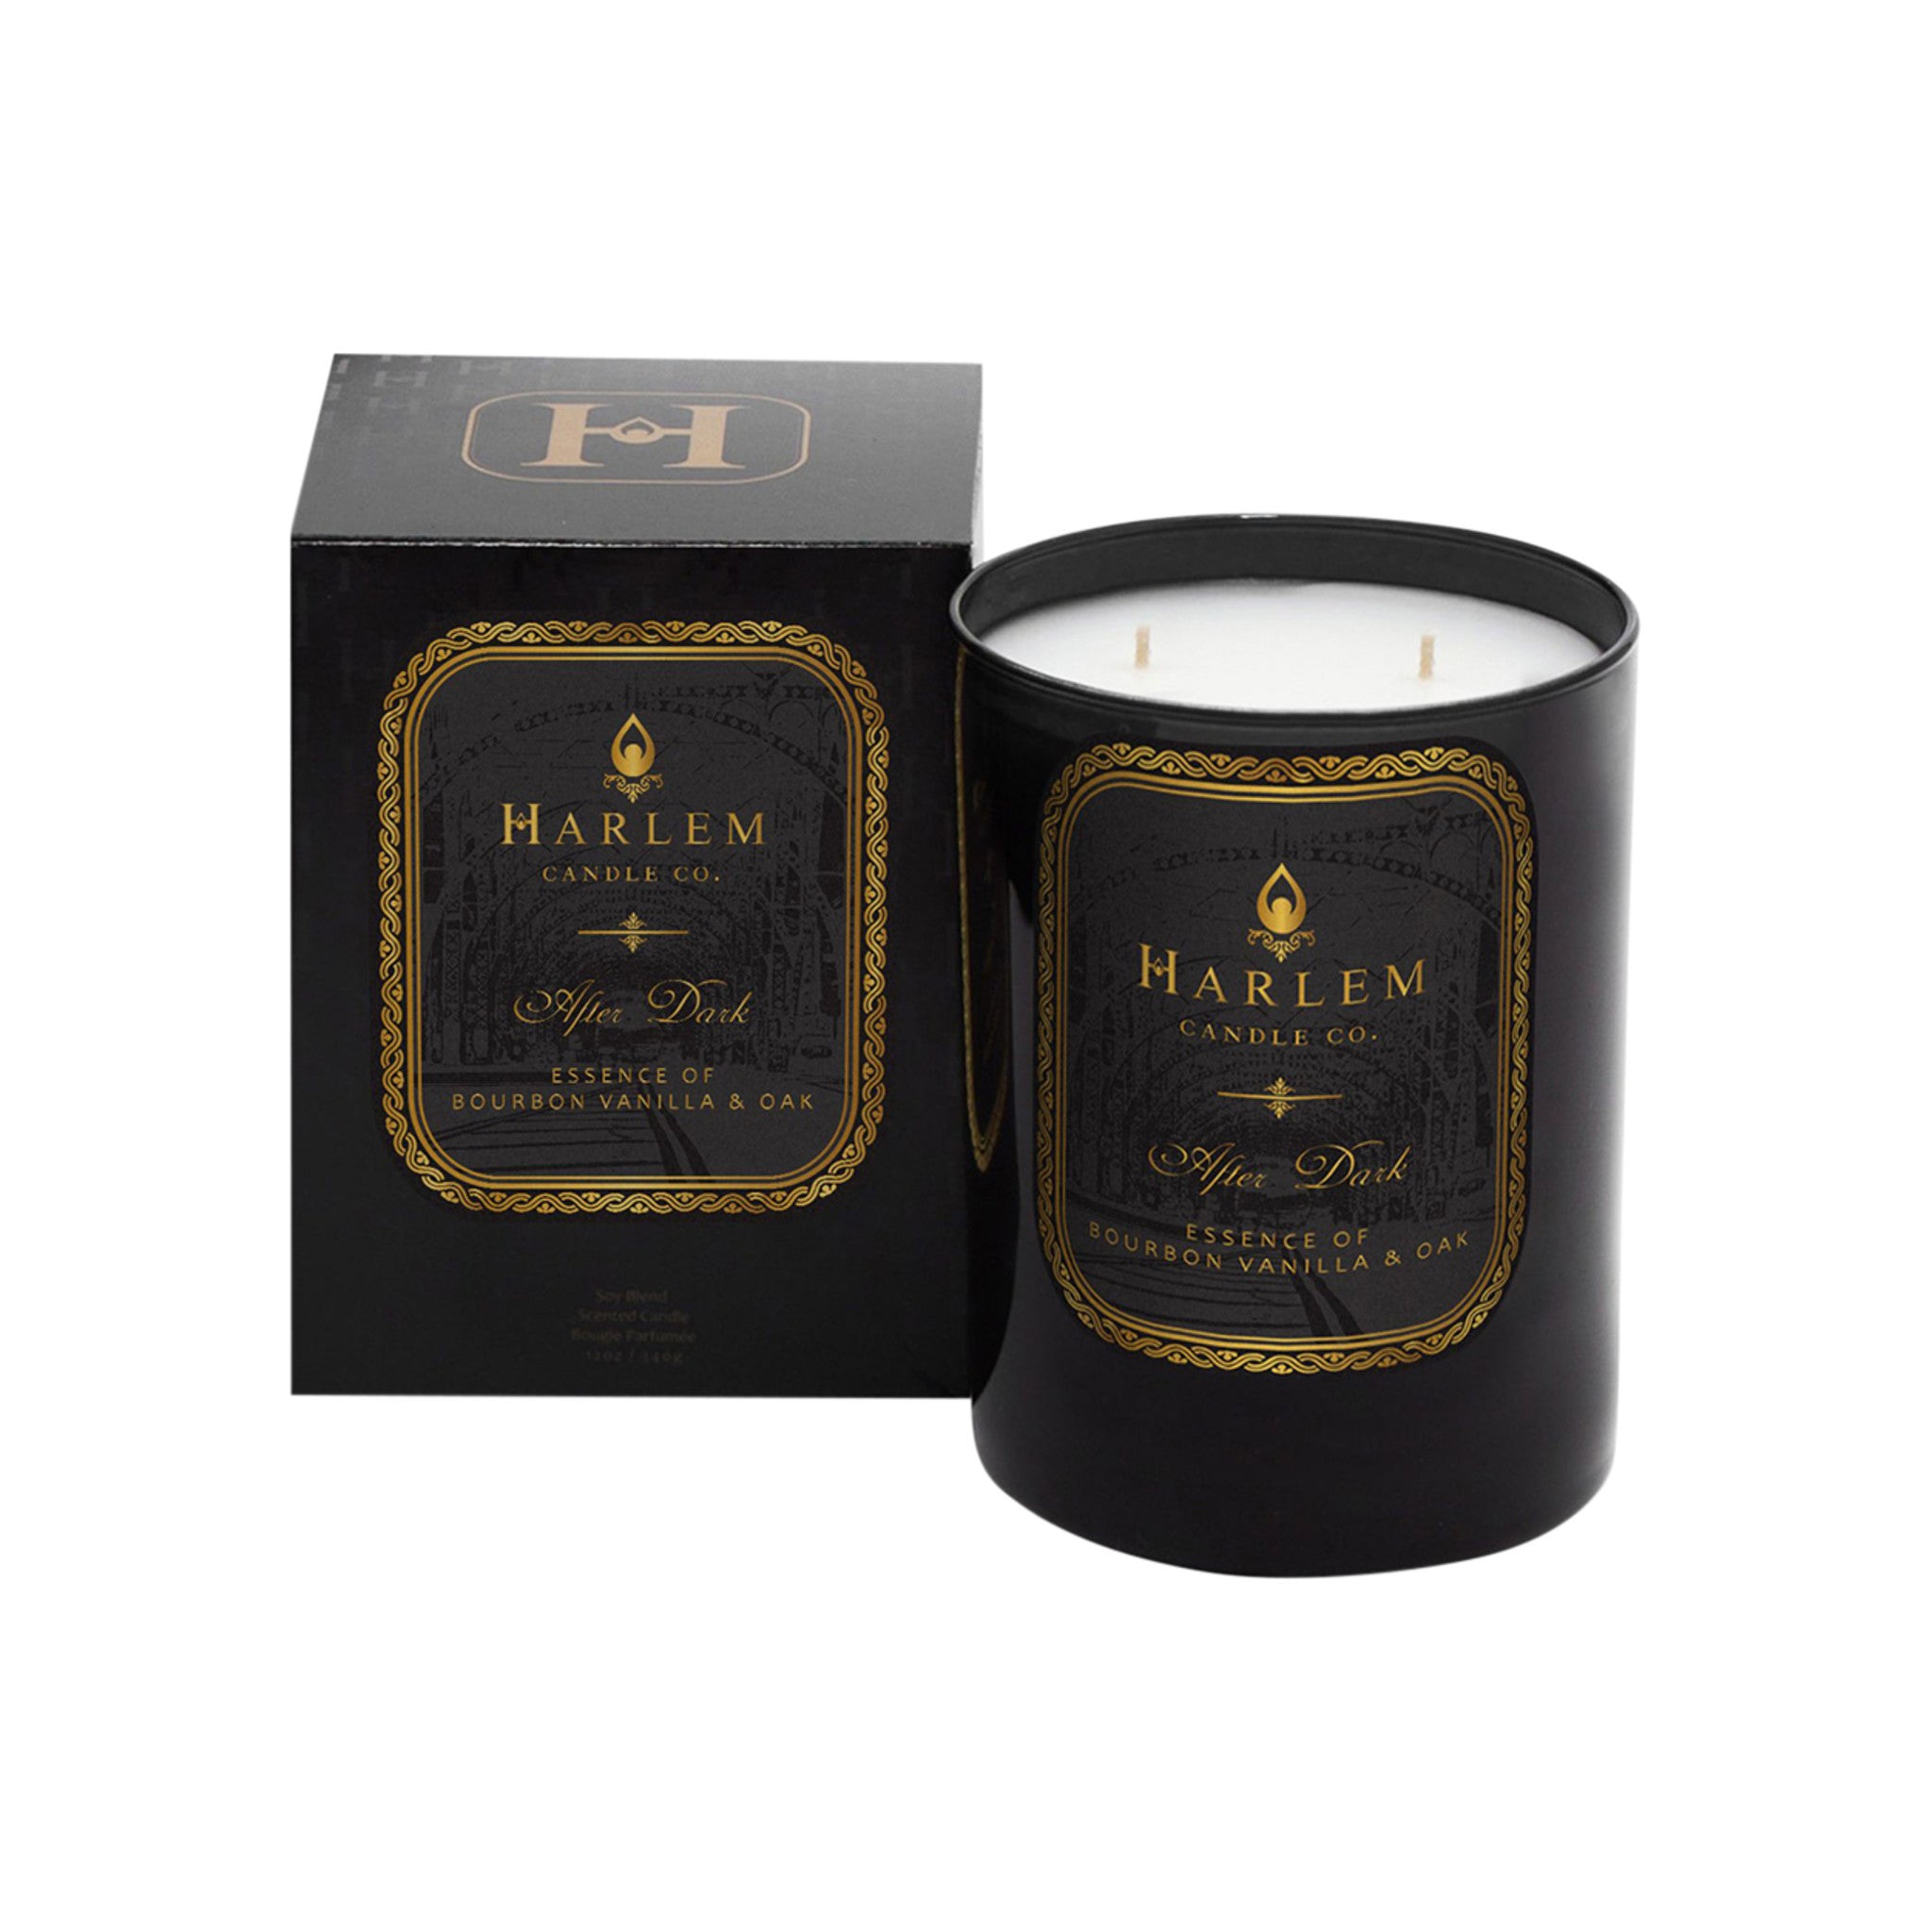 Harlem Candle Co. After Dark Luxury Candle main image.